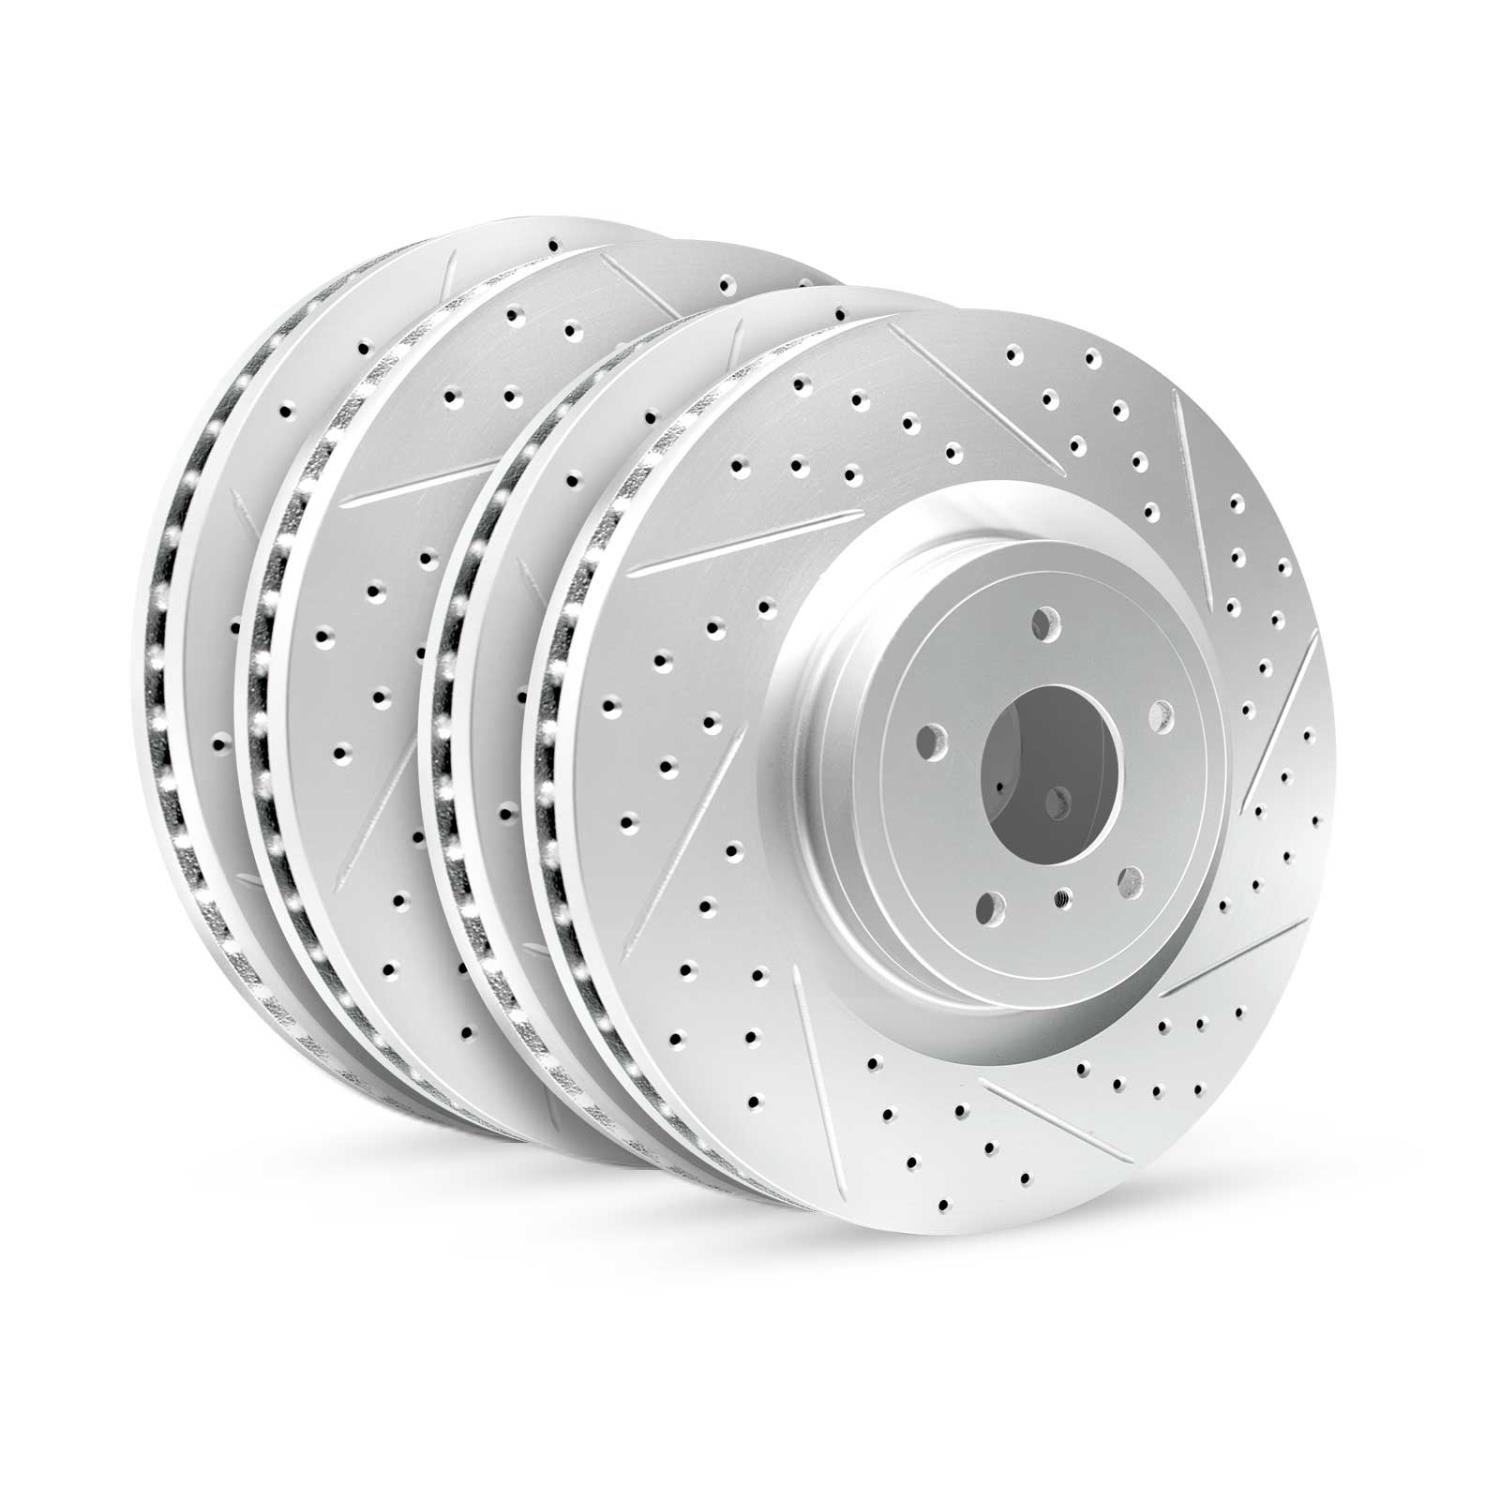 GEO-Carbon Drilled/Slotted Rotors, 2004-2005 Kia/Hyundai/Genesis, Position: Front/Rear